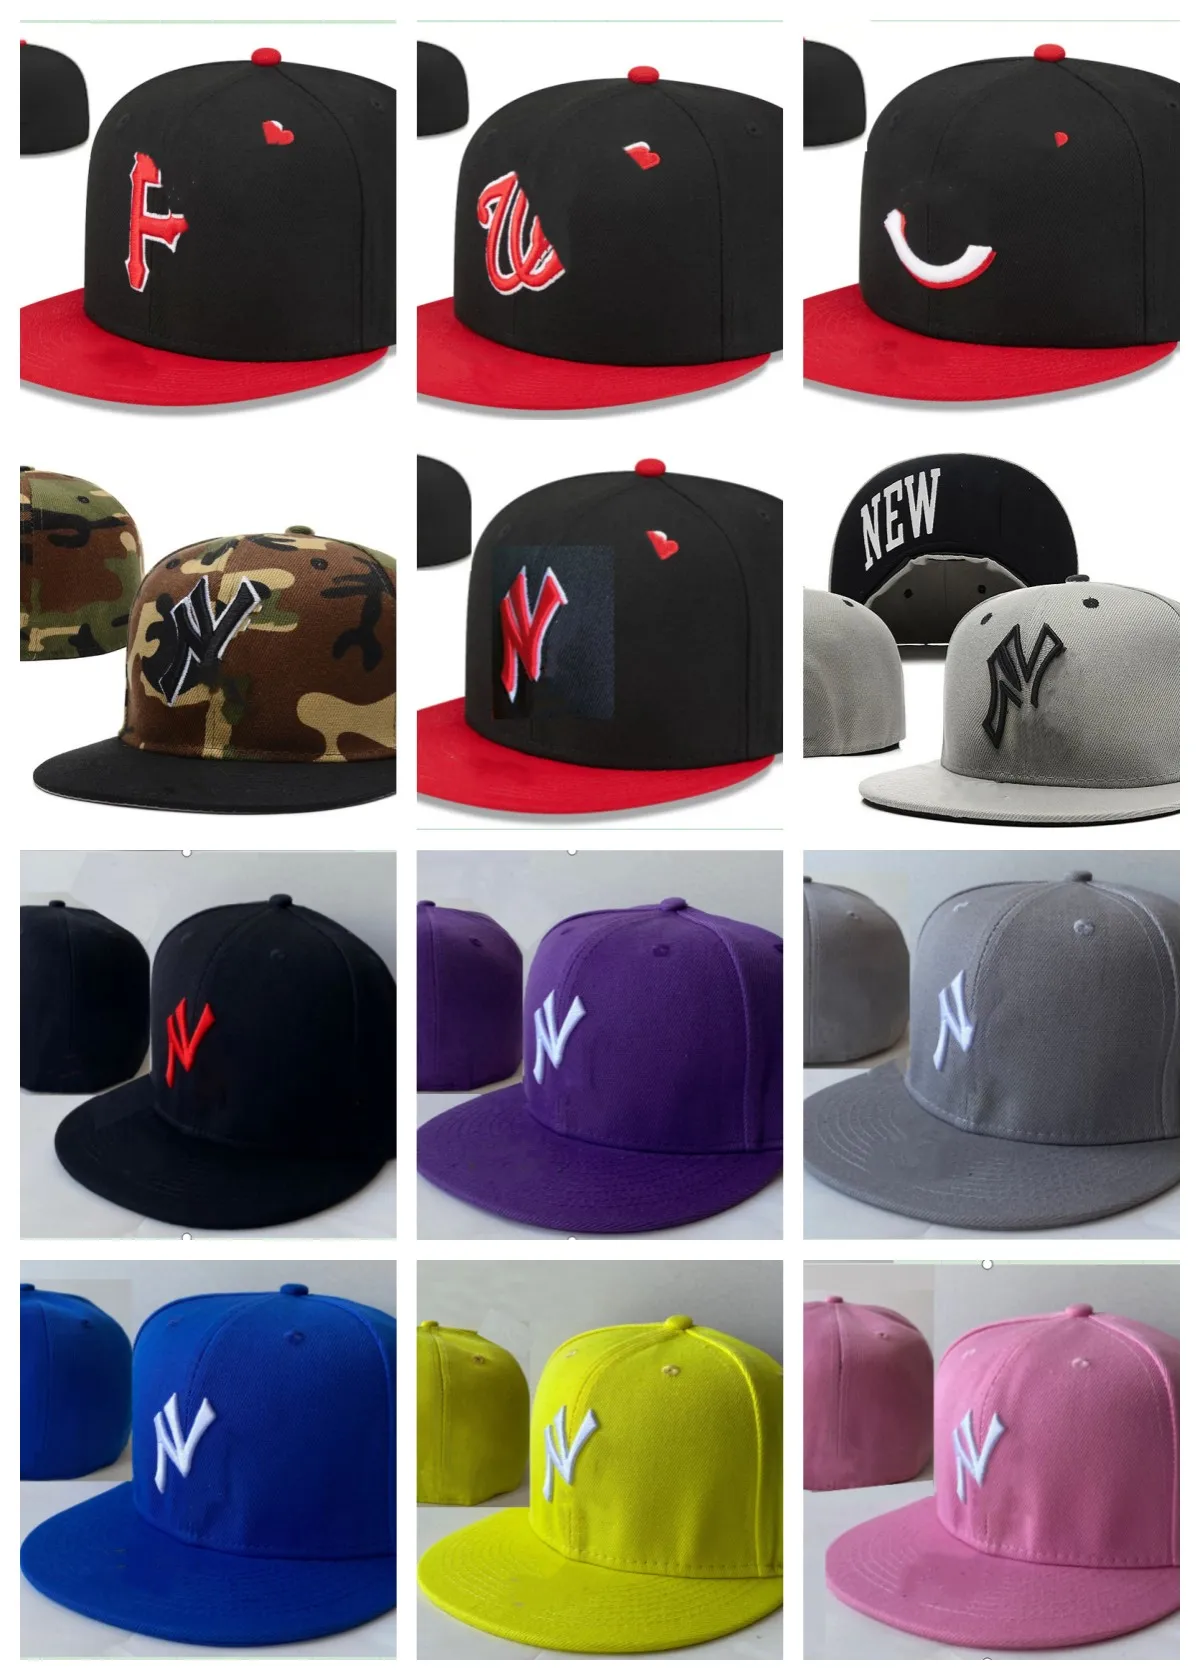 Wholesale Designer Fitted hats size Flat hat unisex Baseball Snapbacks Fit Flat hat Embroidery Adjustable basketball Caps Outdoor Sports Hip Hop Mesh cap mix order